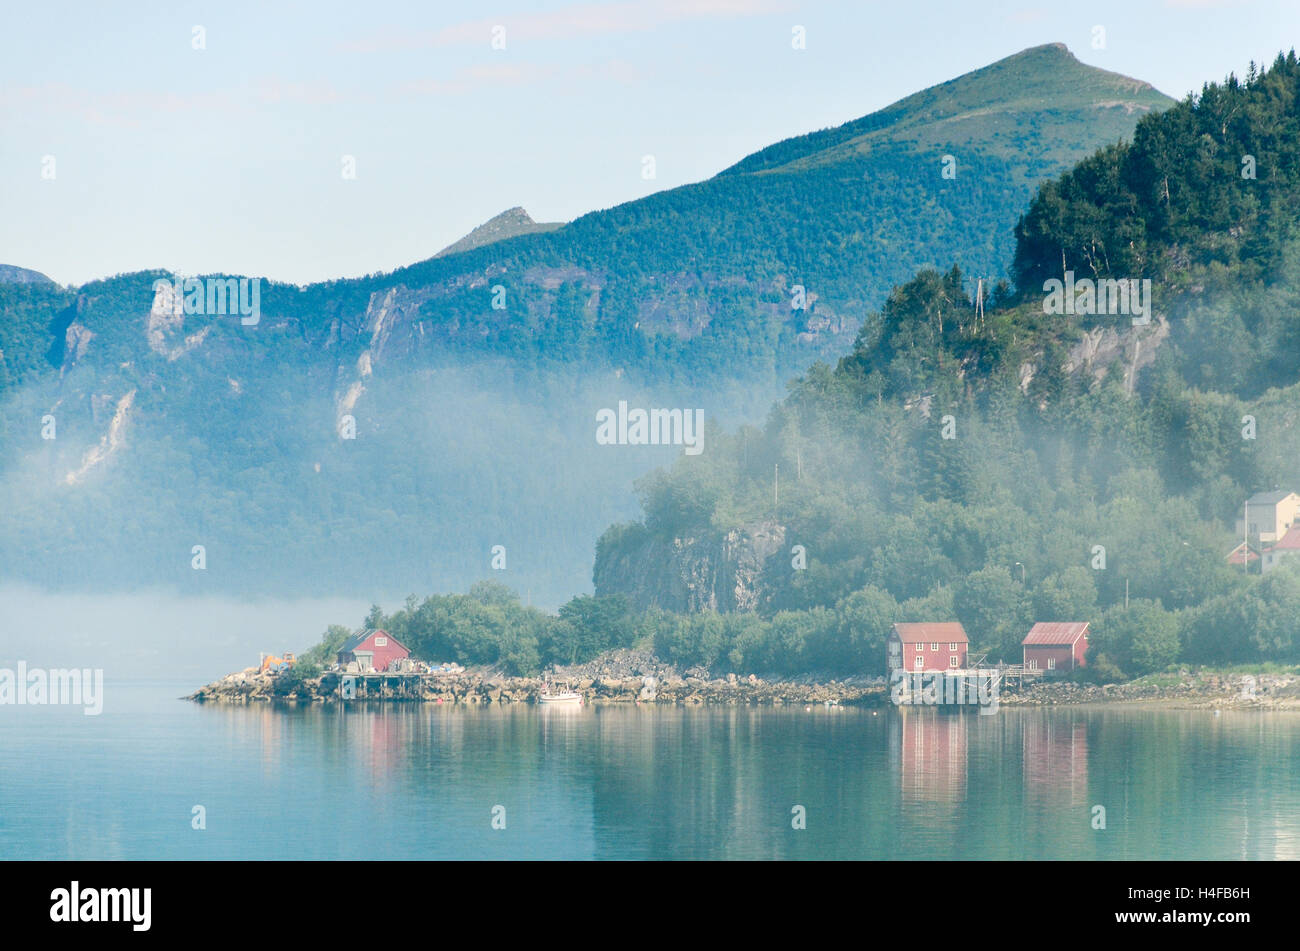 Cabins by the waters of Glomfjord, Northern Norway Stock Photo